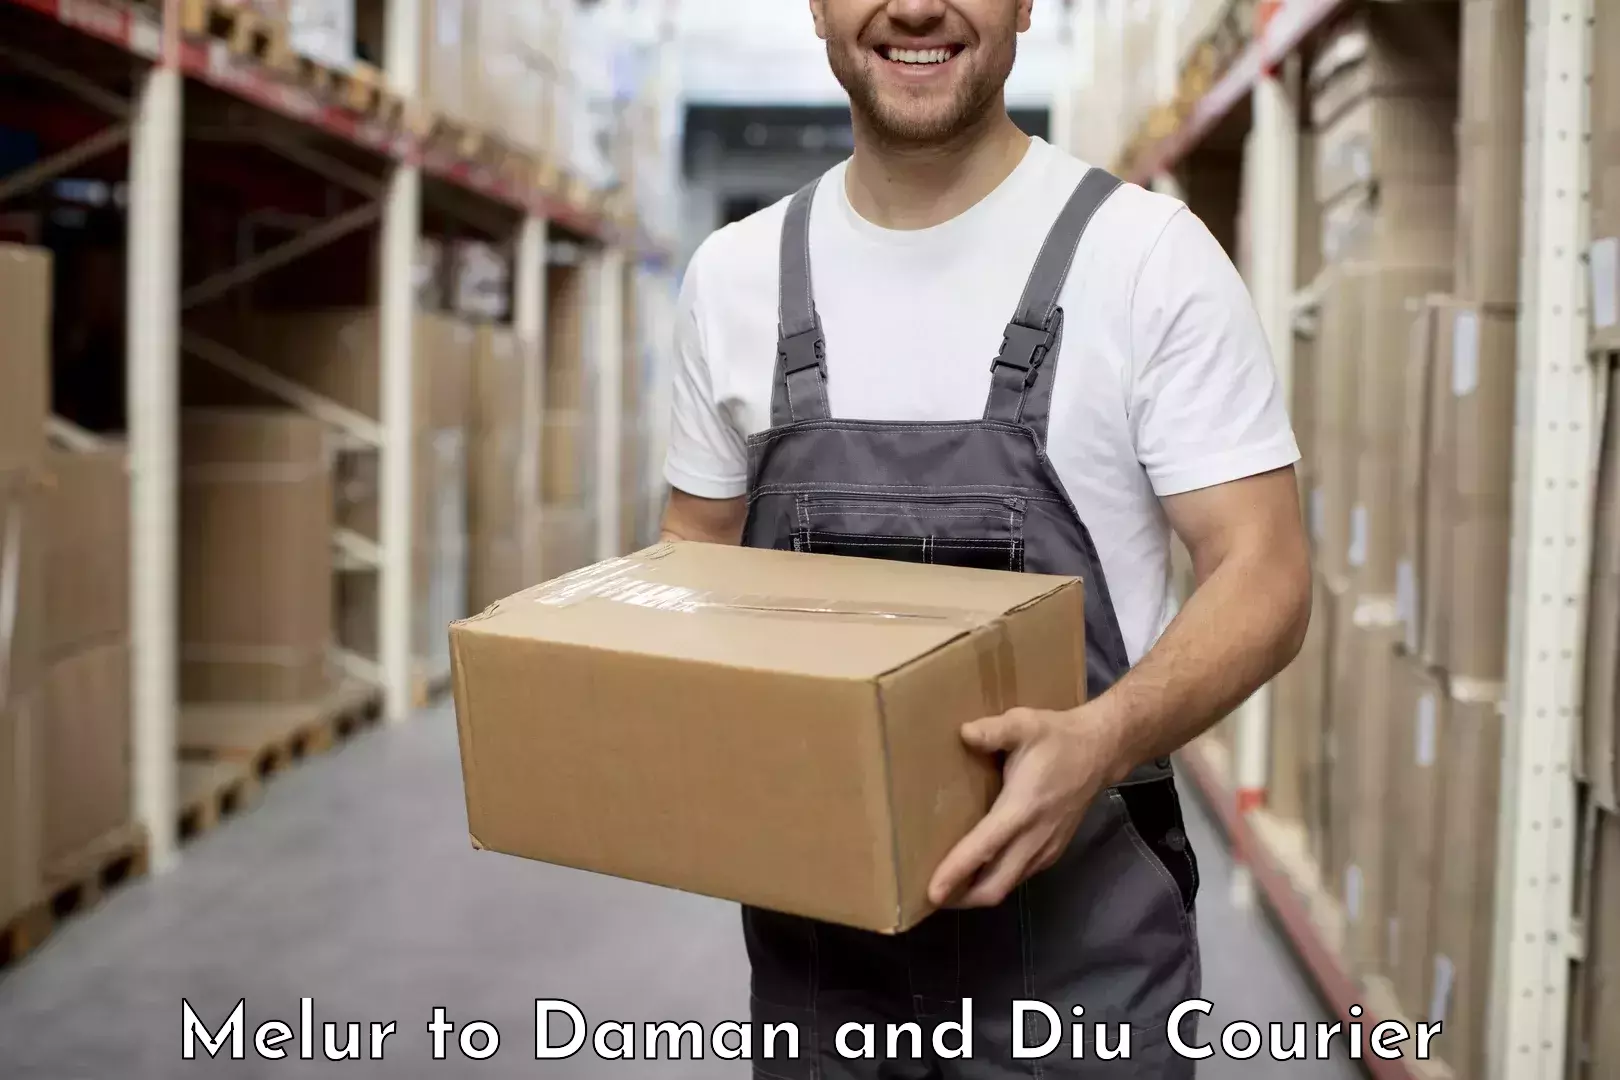 Residential courier service Melur to Daman